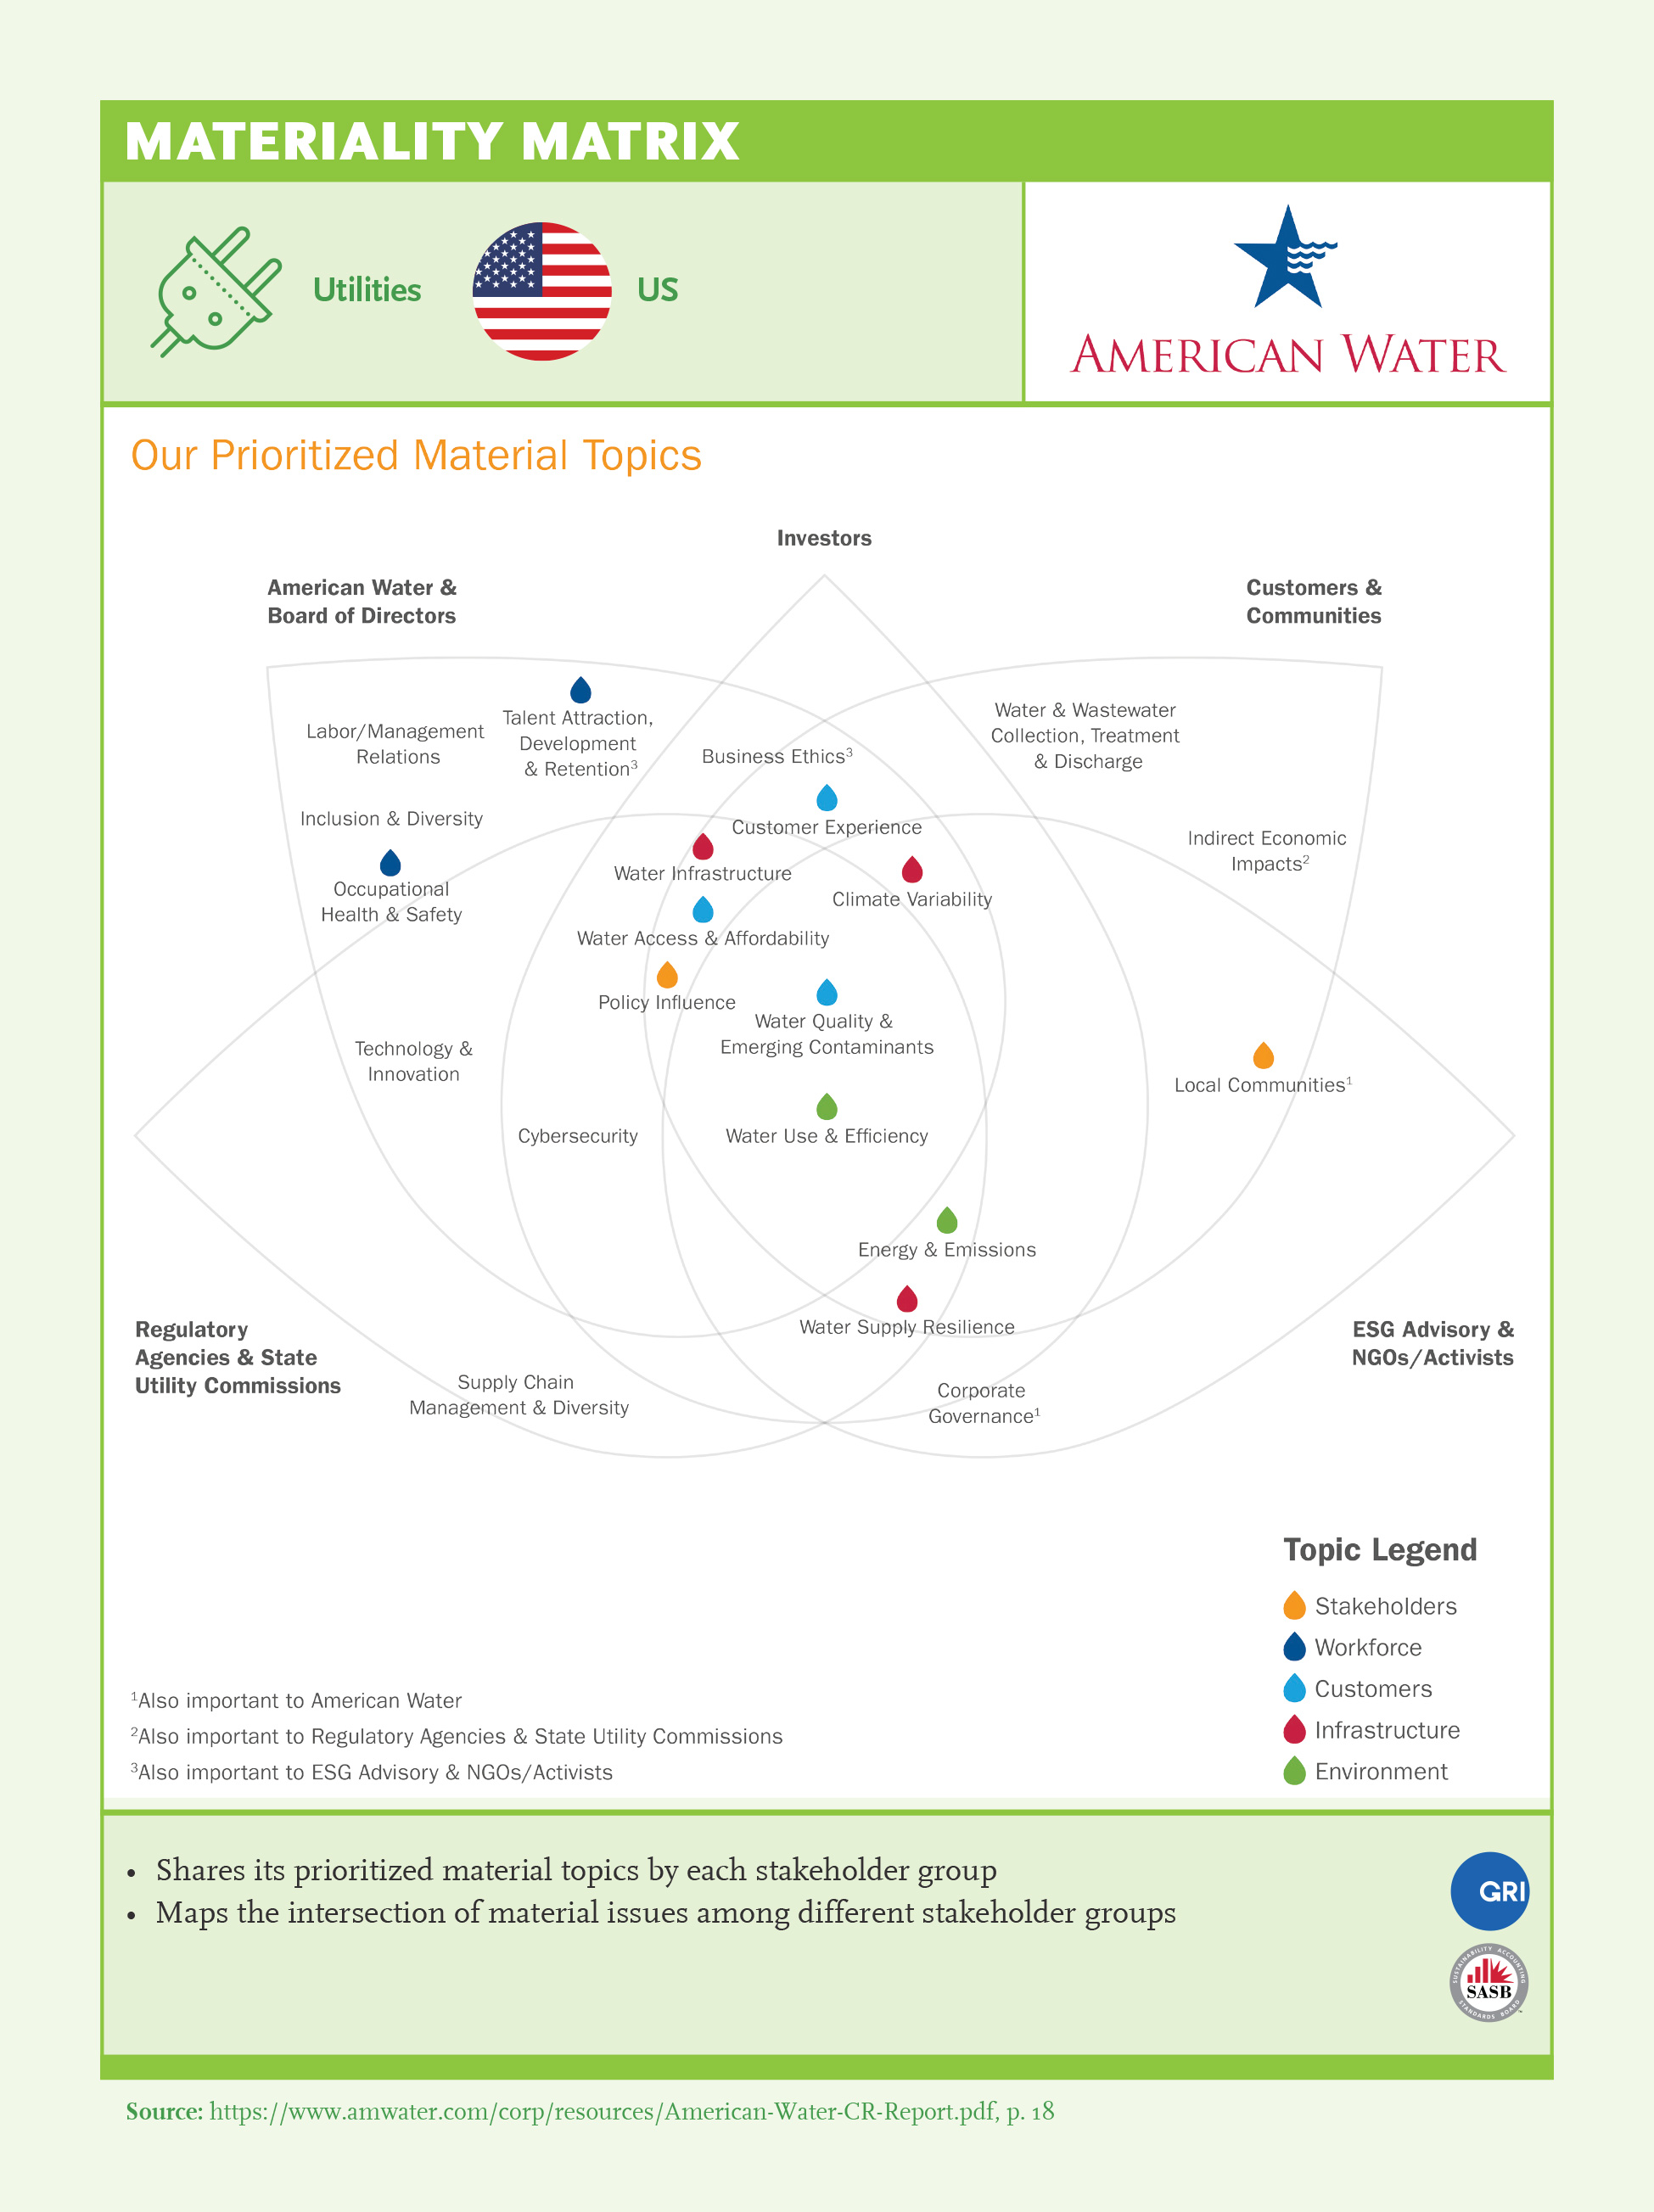 Materiality Matrix: American Water Works